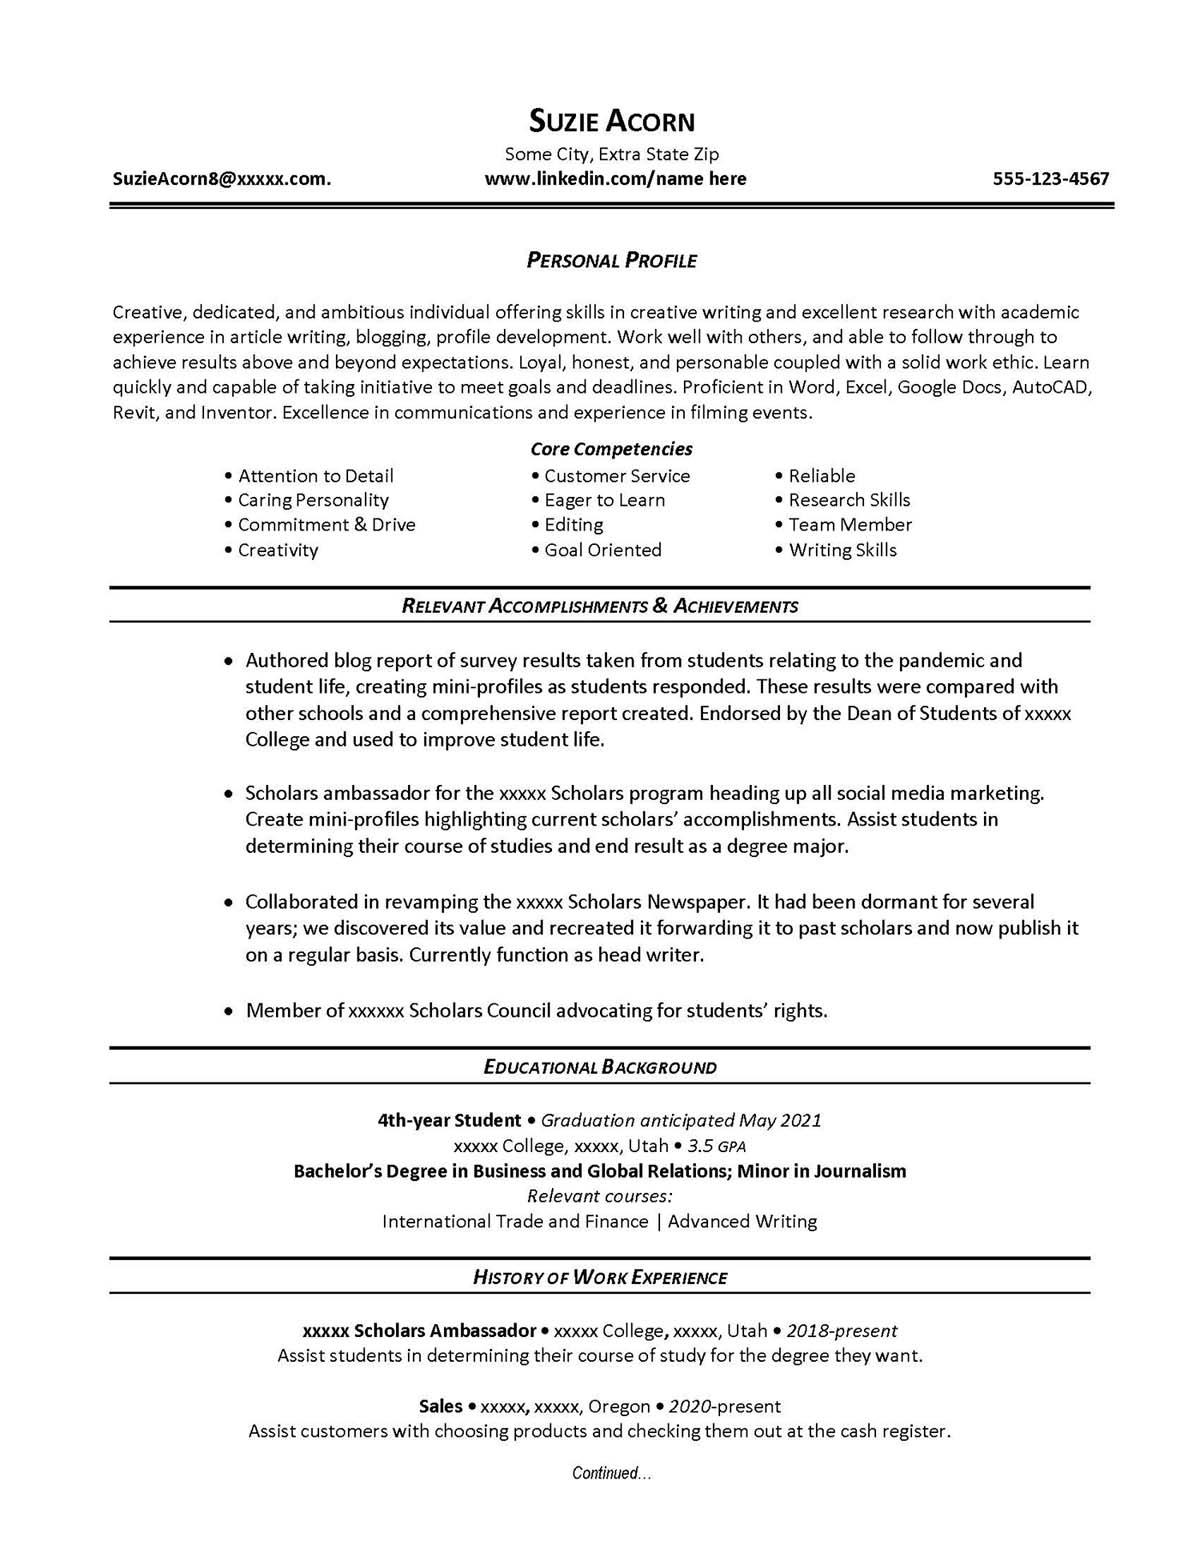 Sample resume: Sales, Entry Level, Functional